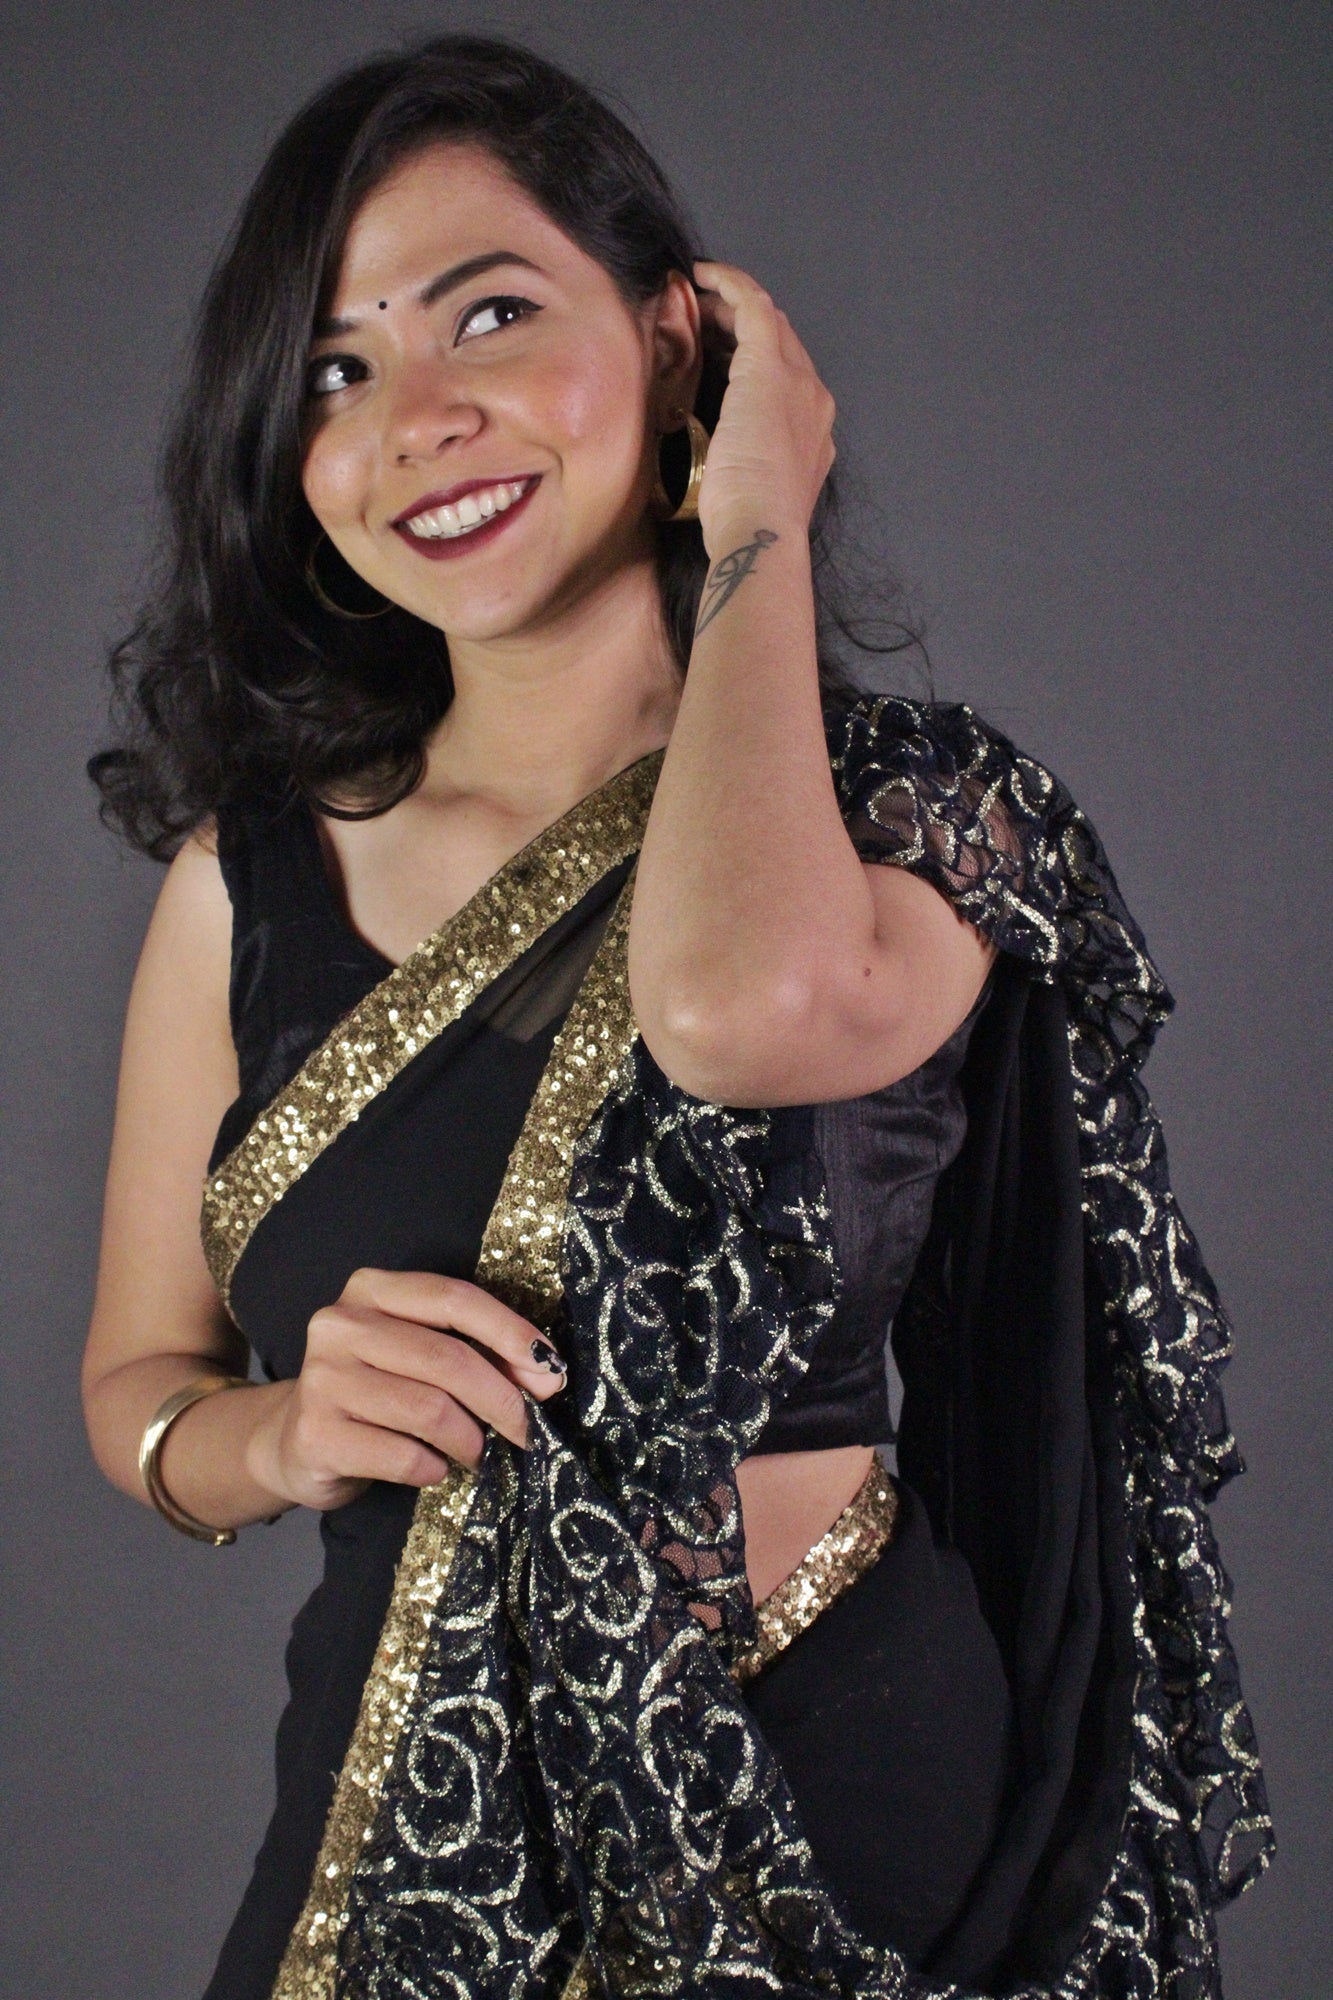 Designer Black Ruffle, with Golden Lace Wrap in 1 minute saree - Isadora Life Online Shopping Store